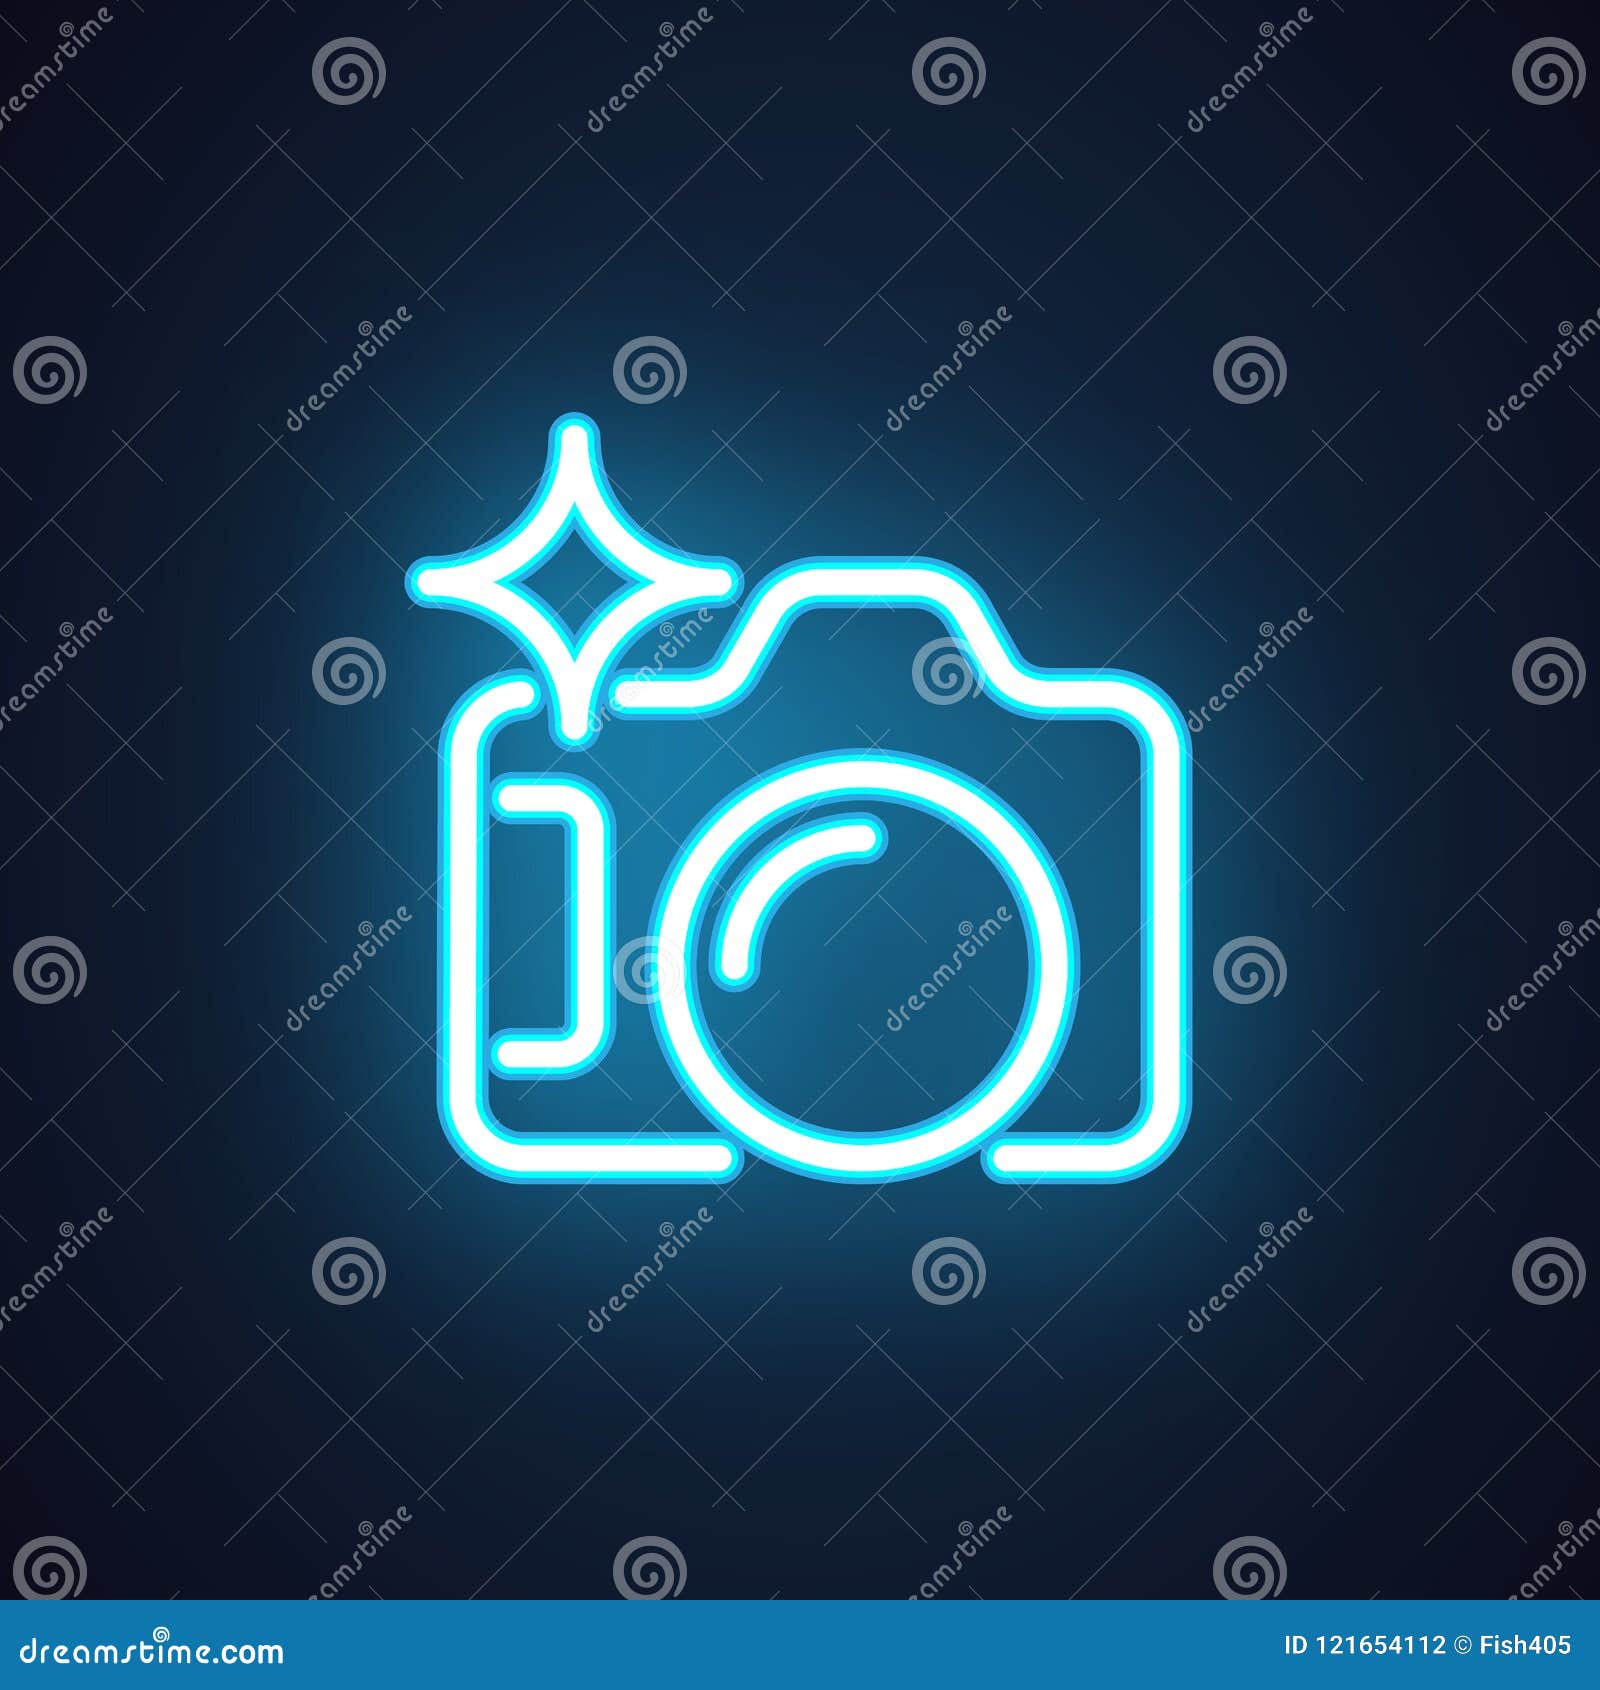 neon interface camera label websites apps concept icon